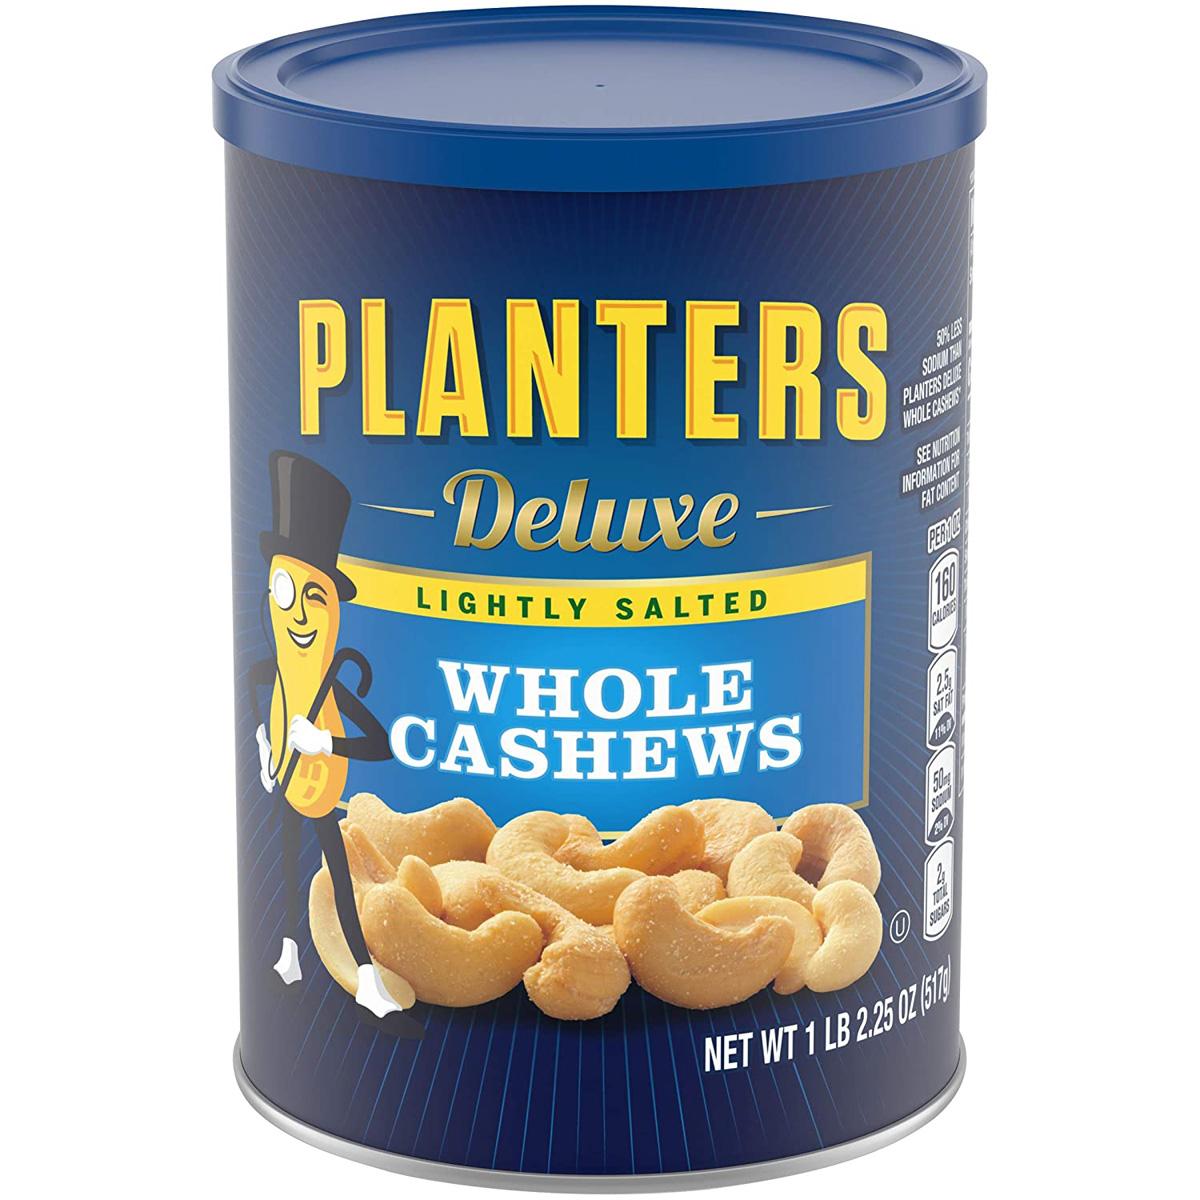 Planters Deluxe Lightly Salted Whole Cashews for $7.56 Shipped